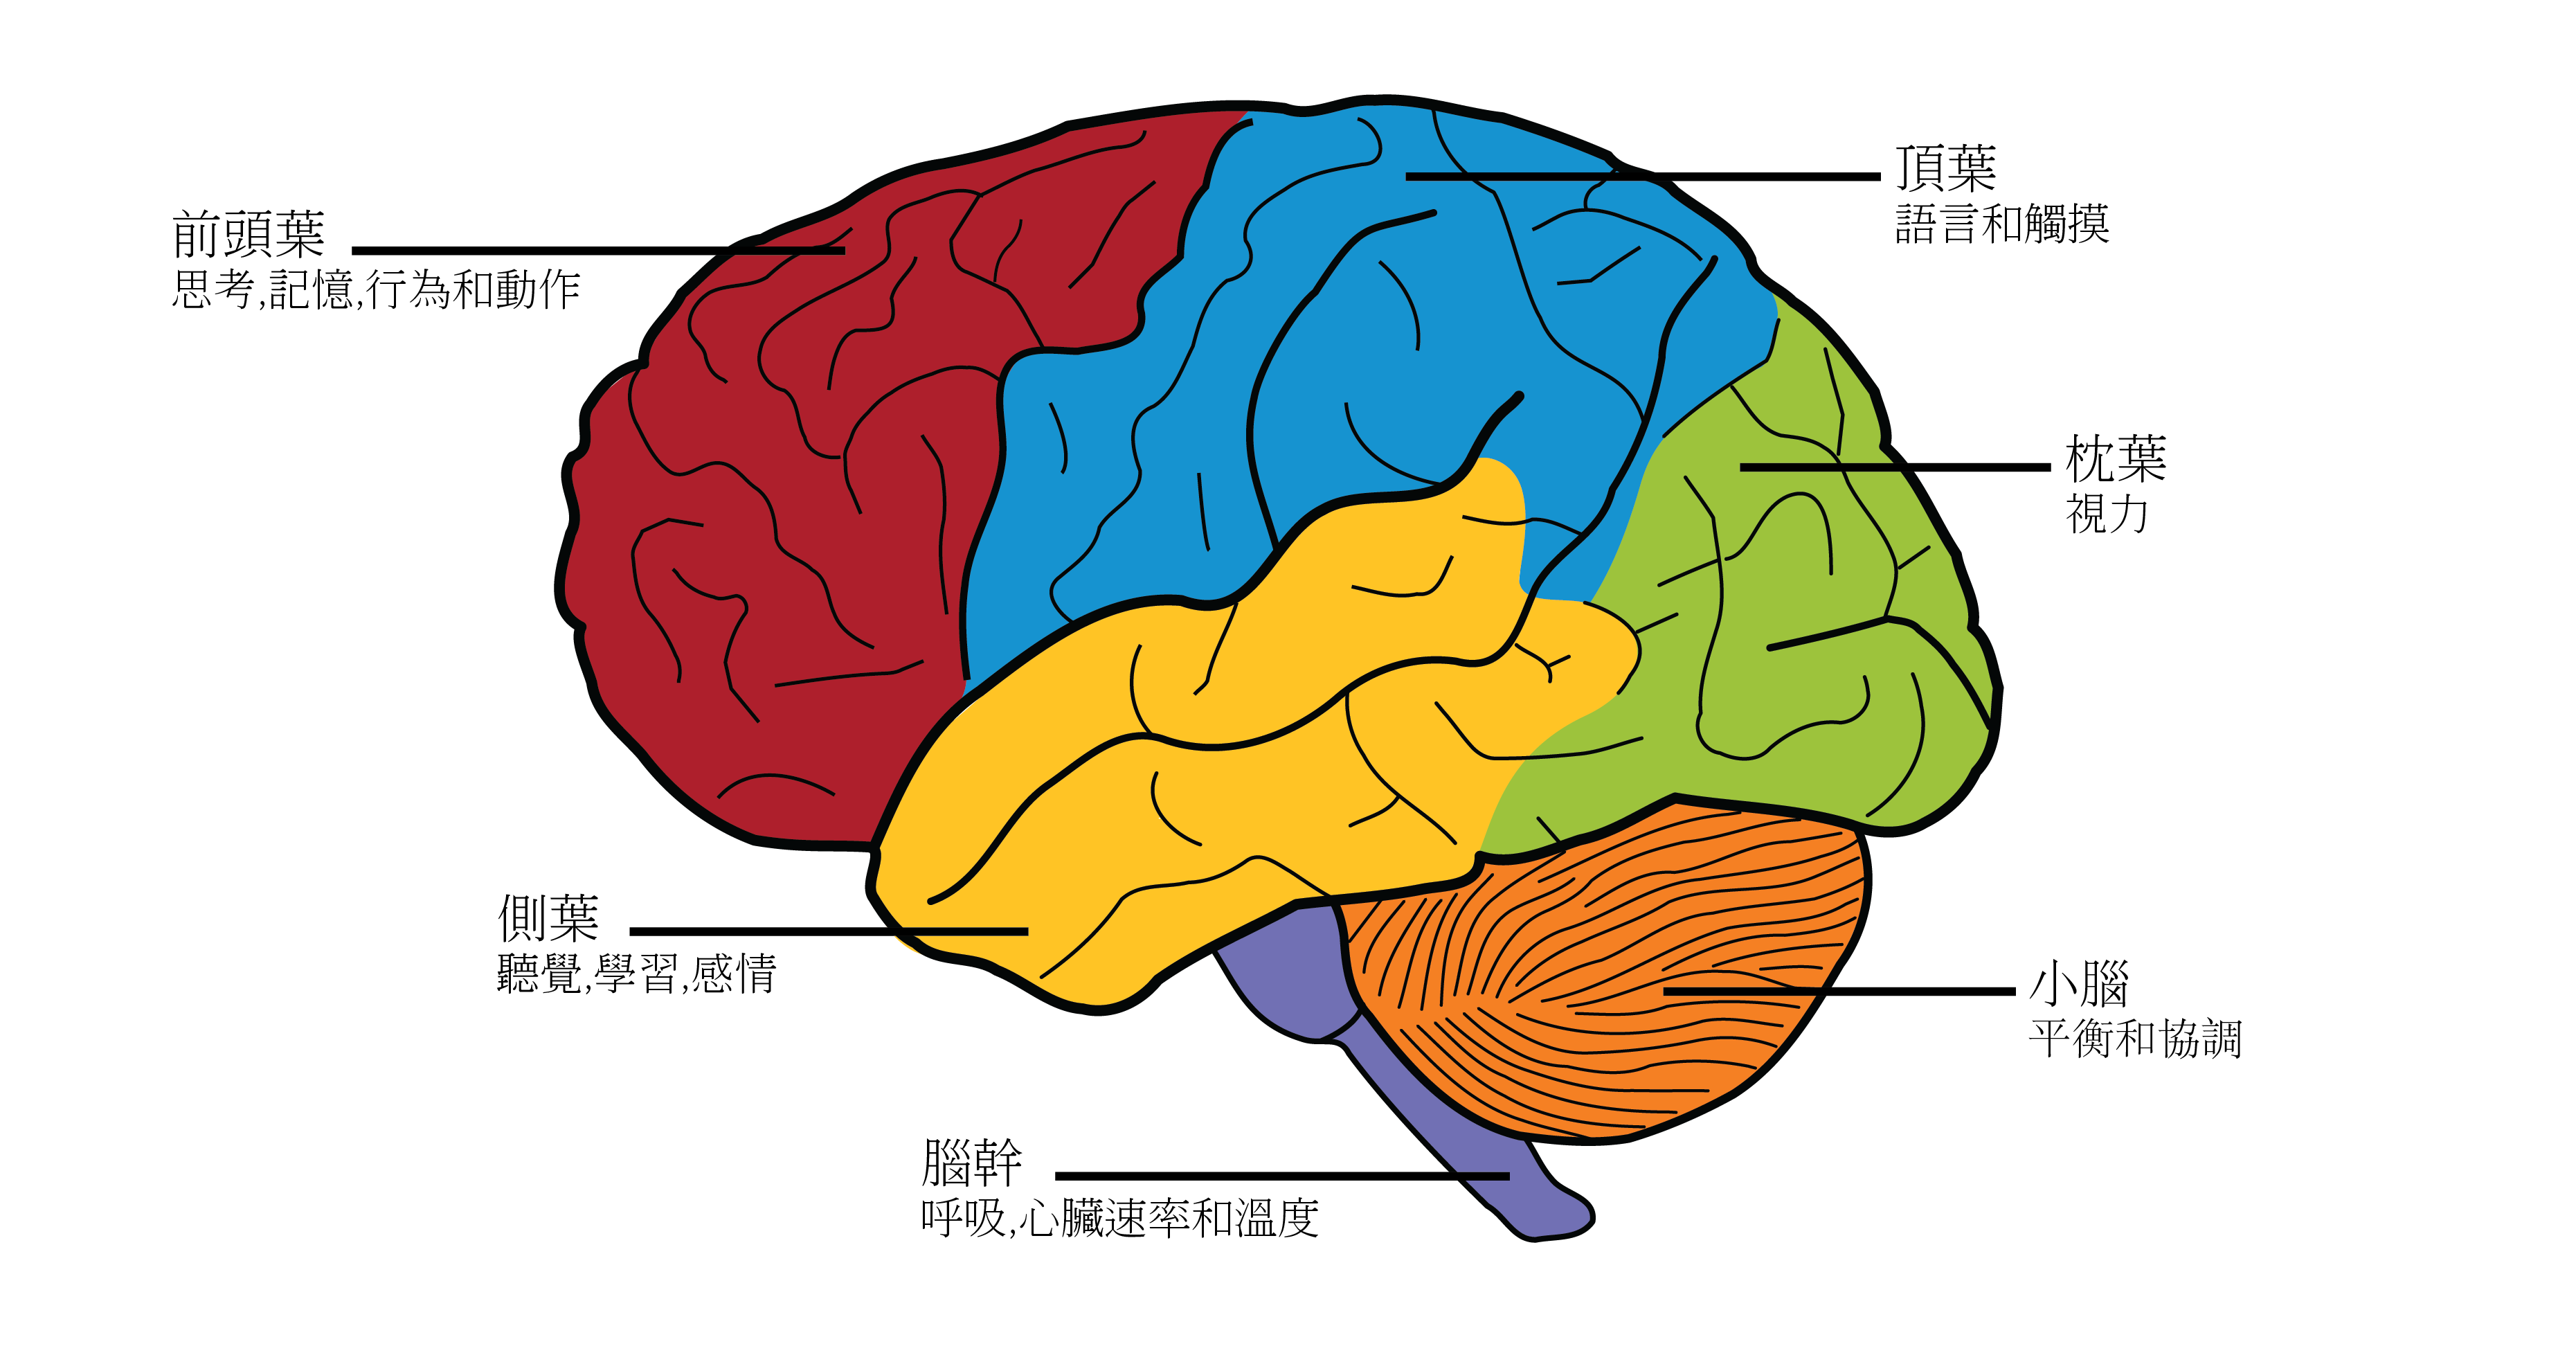 Lobes of the Brain, labeled in Chinese